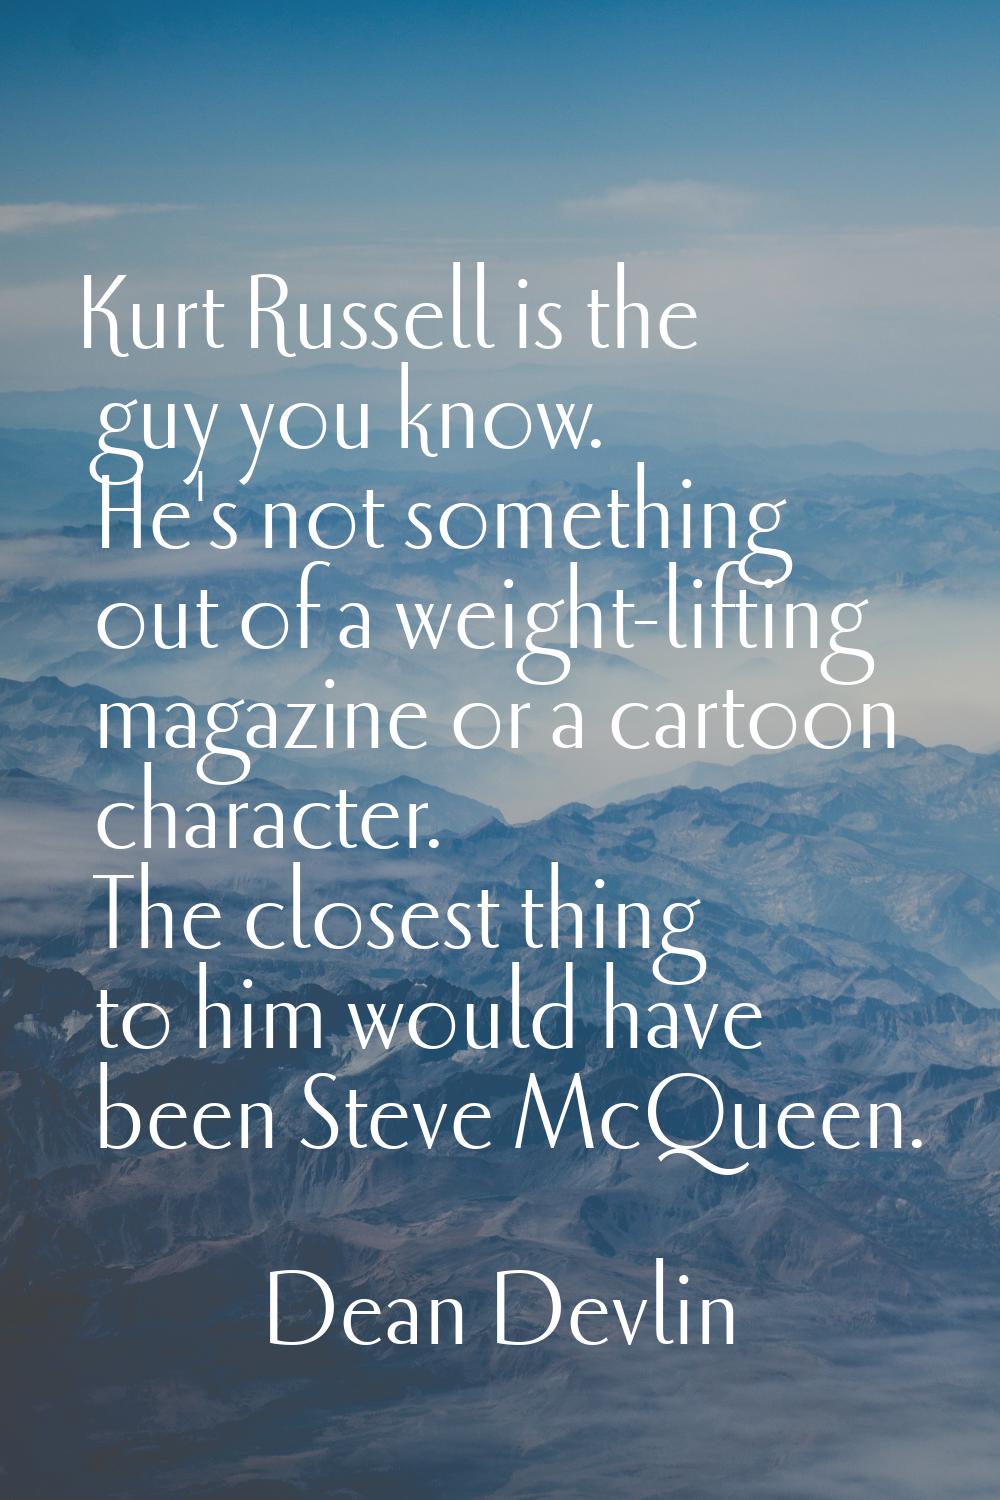 Kurt Russell is the guy you know. He's not something out of a weight-lifting magazine or a cartoon 